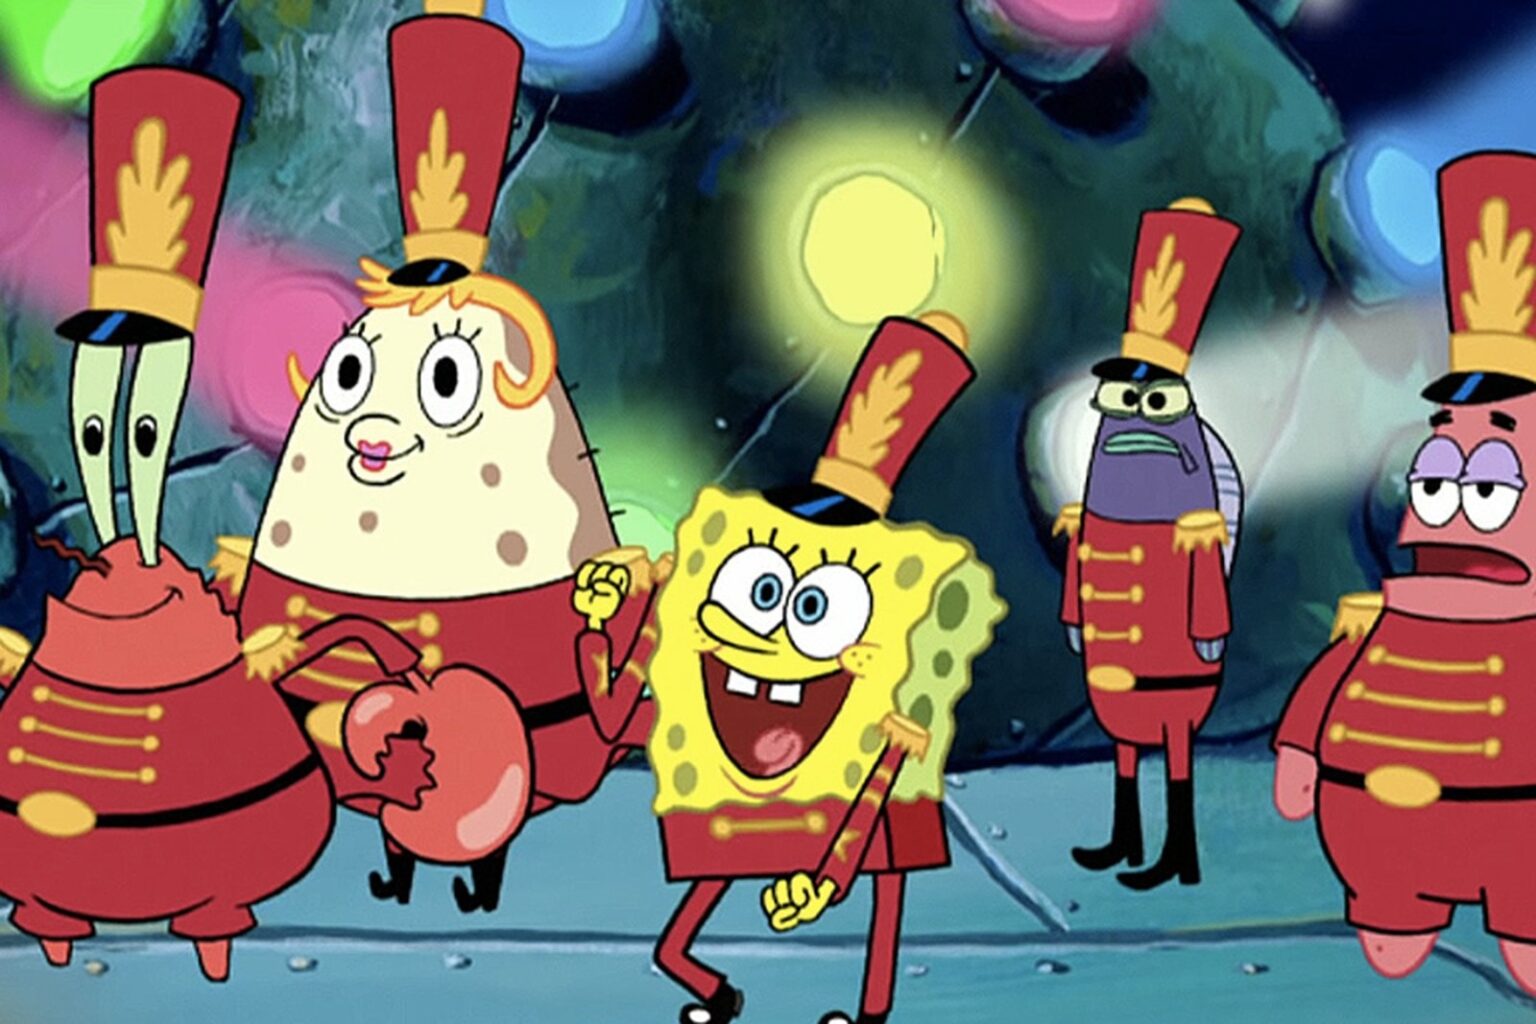 SpongeBob fans were thrilled with the reference made during a Super Bowl commercial. Hearing the song "Sweet Victory" was all they wanted.